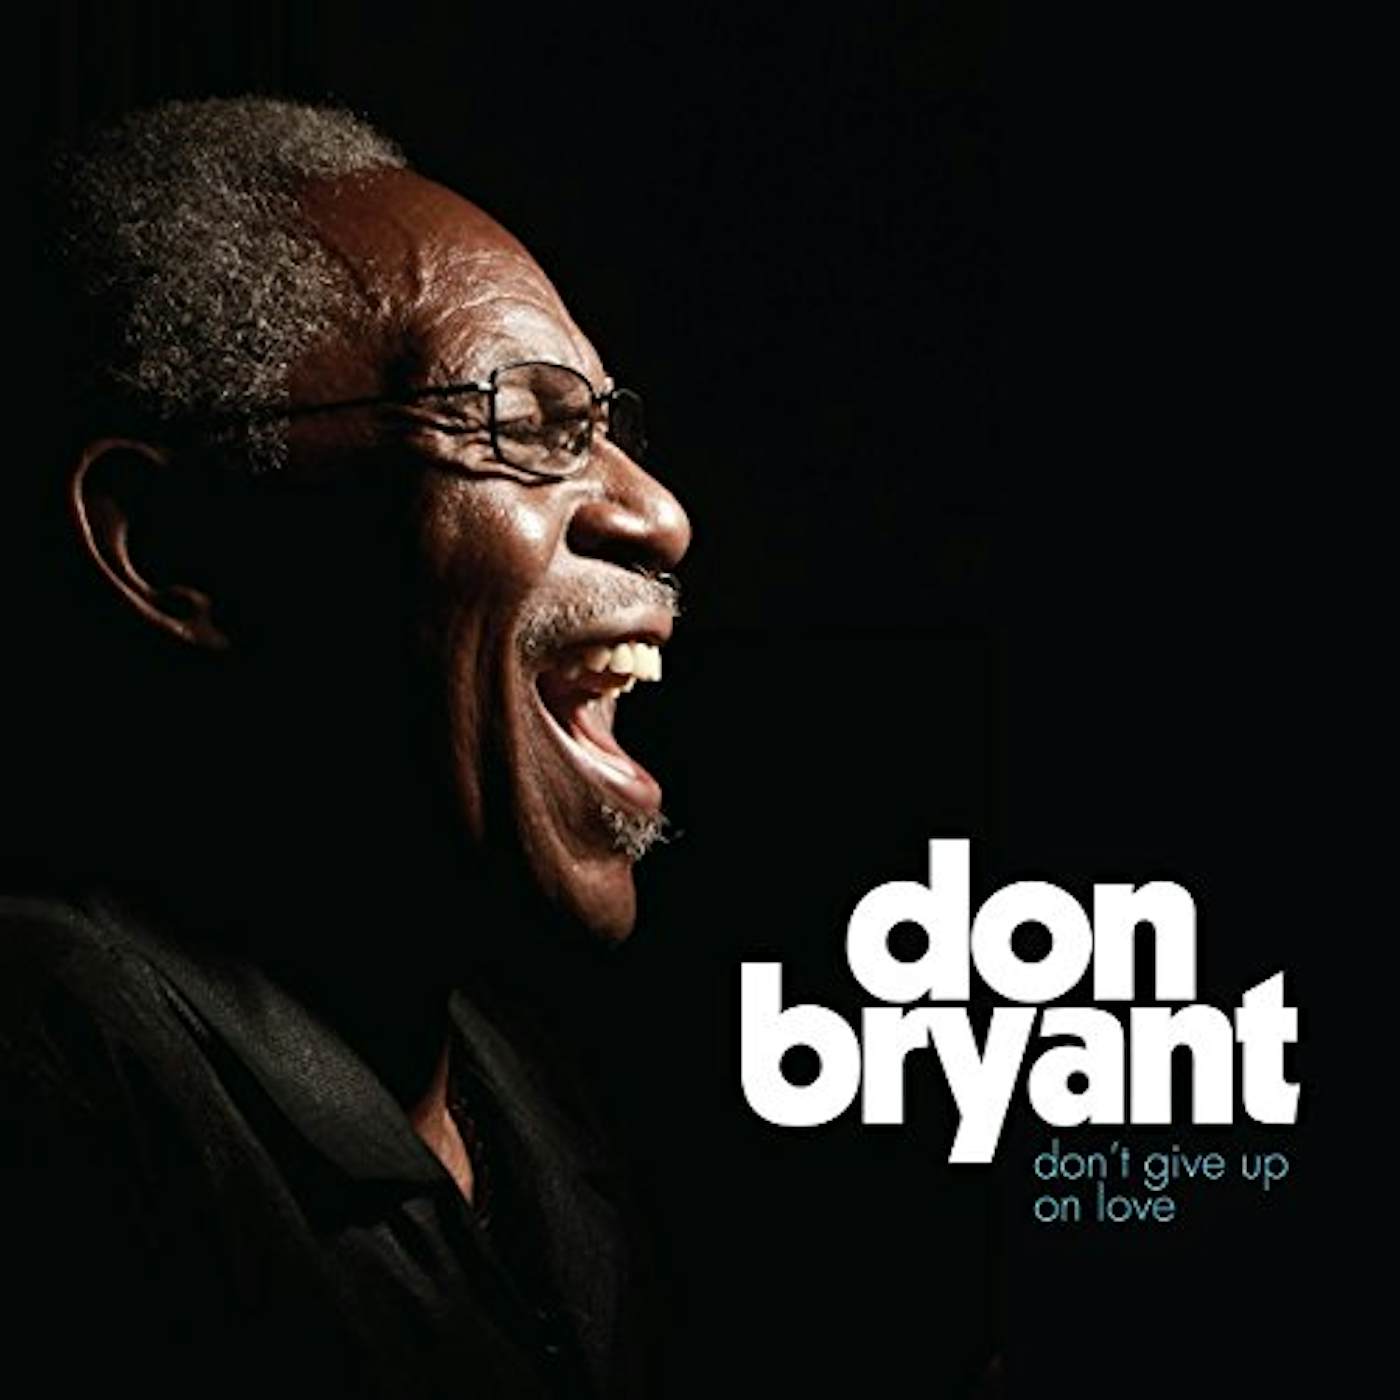 Don Bryant DON'T GIVE UP ON LOVE CD